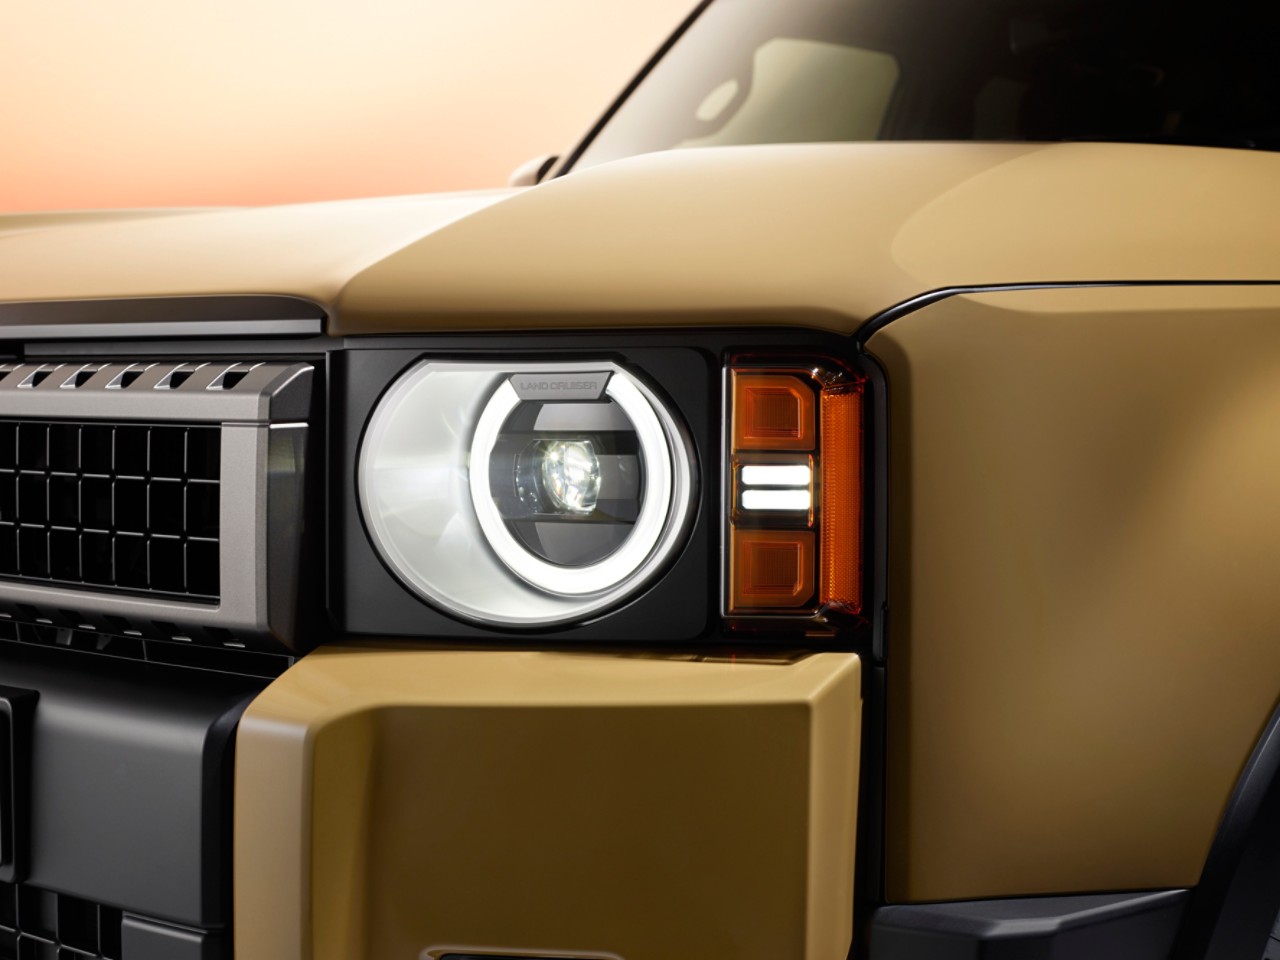 A front view of the all-new Toyota Land Cruiser parked at an angle. Its bright metallic gold paint contrasts with the orange studio setting.